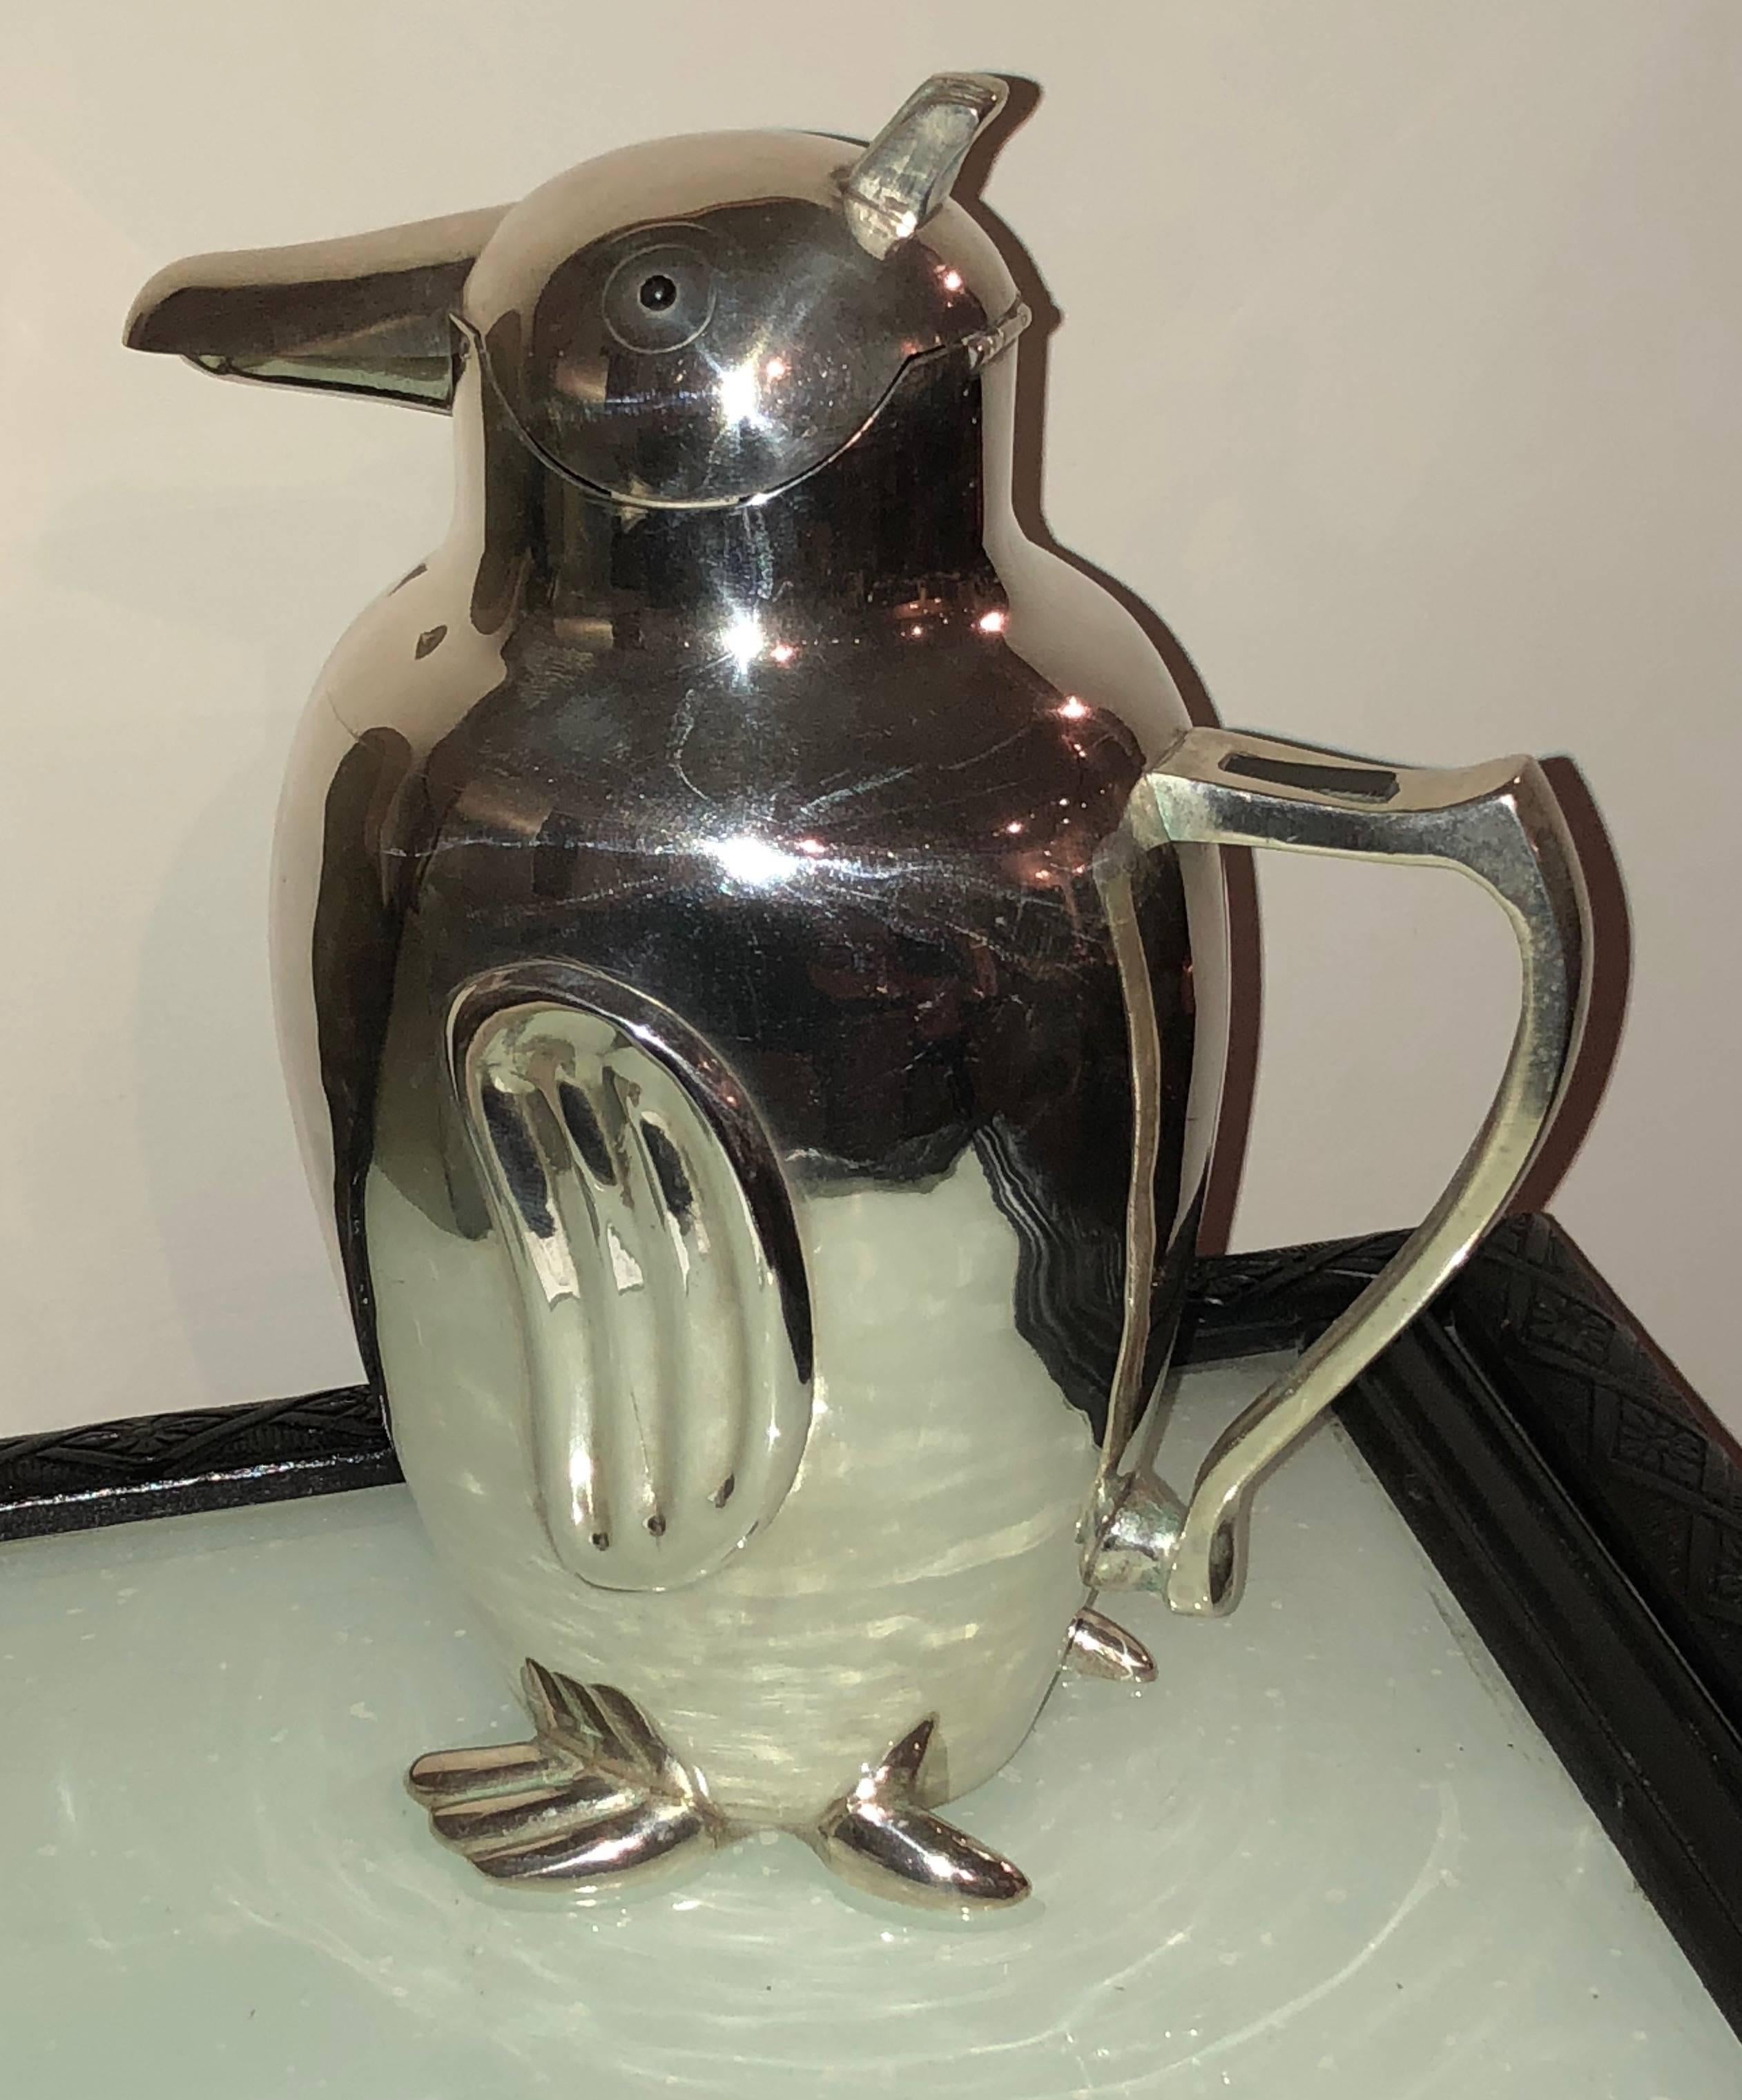 Vintage penguin shape cocktail shaker or pitcher. A very rare piece based originally on an Italian design. This one here reflects just a few of the authentic vintage penguin shapes sold today in the collectibles market. 

This 1930s era model in